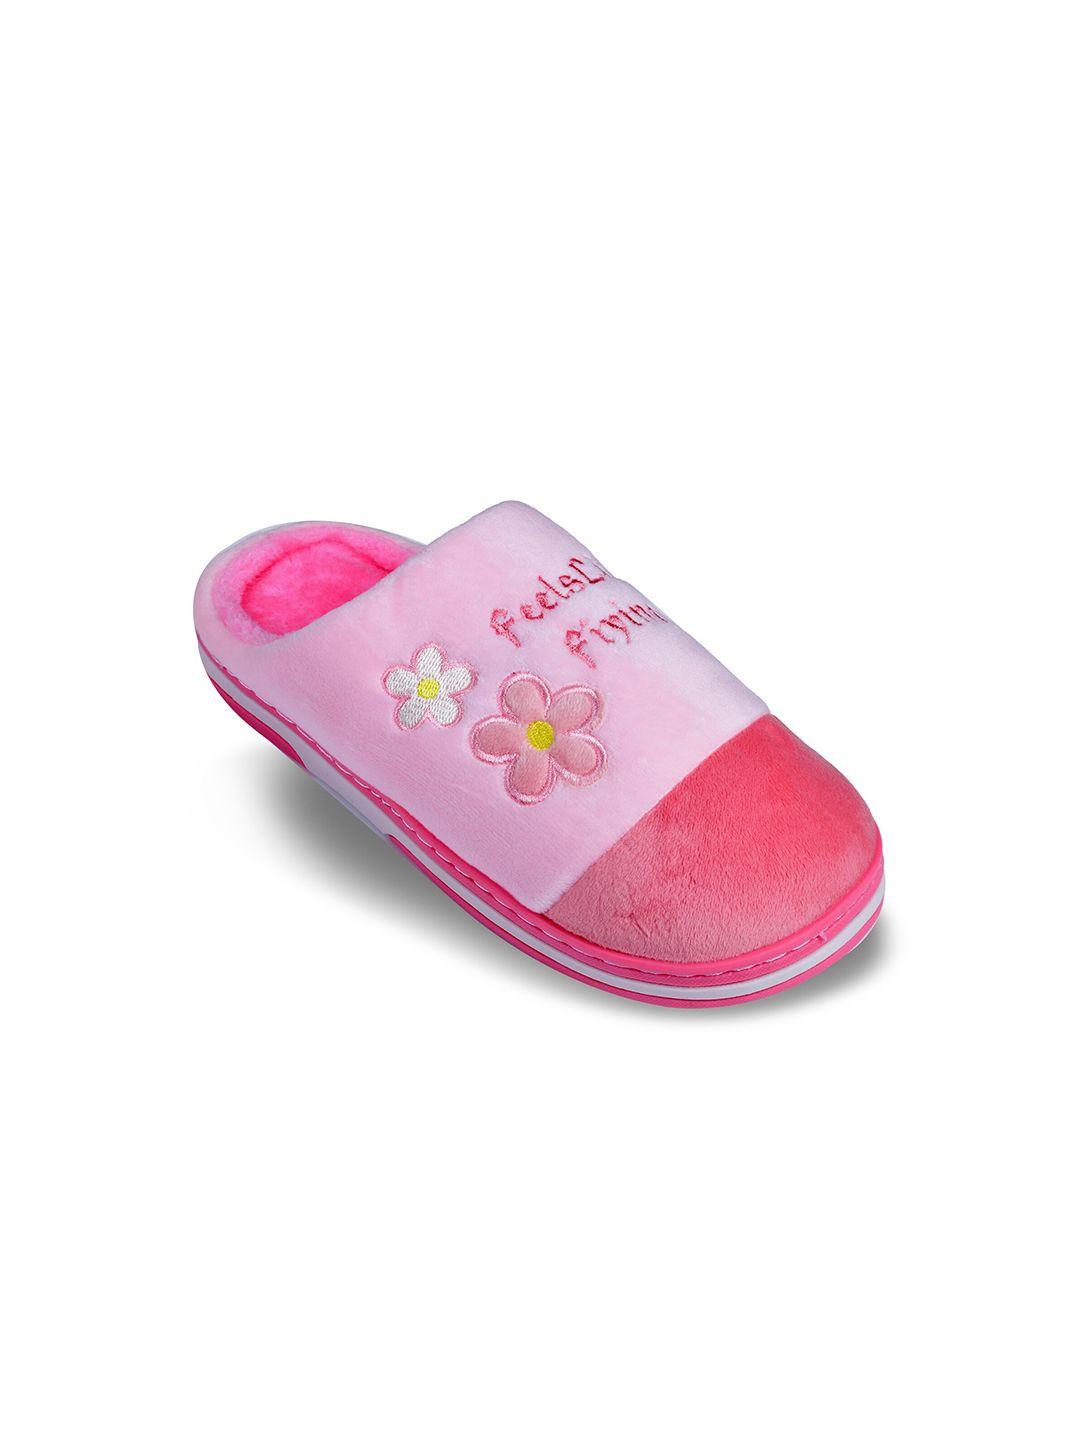 cassiey men pink & white printed room slippers